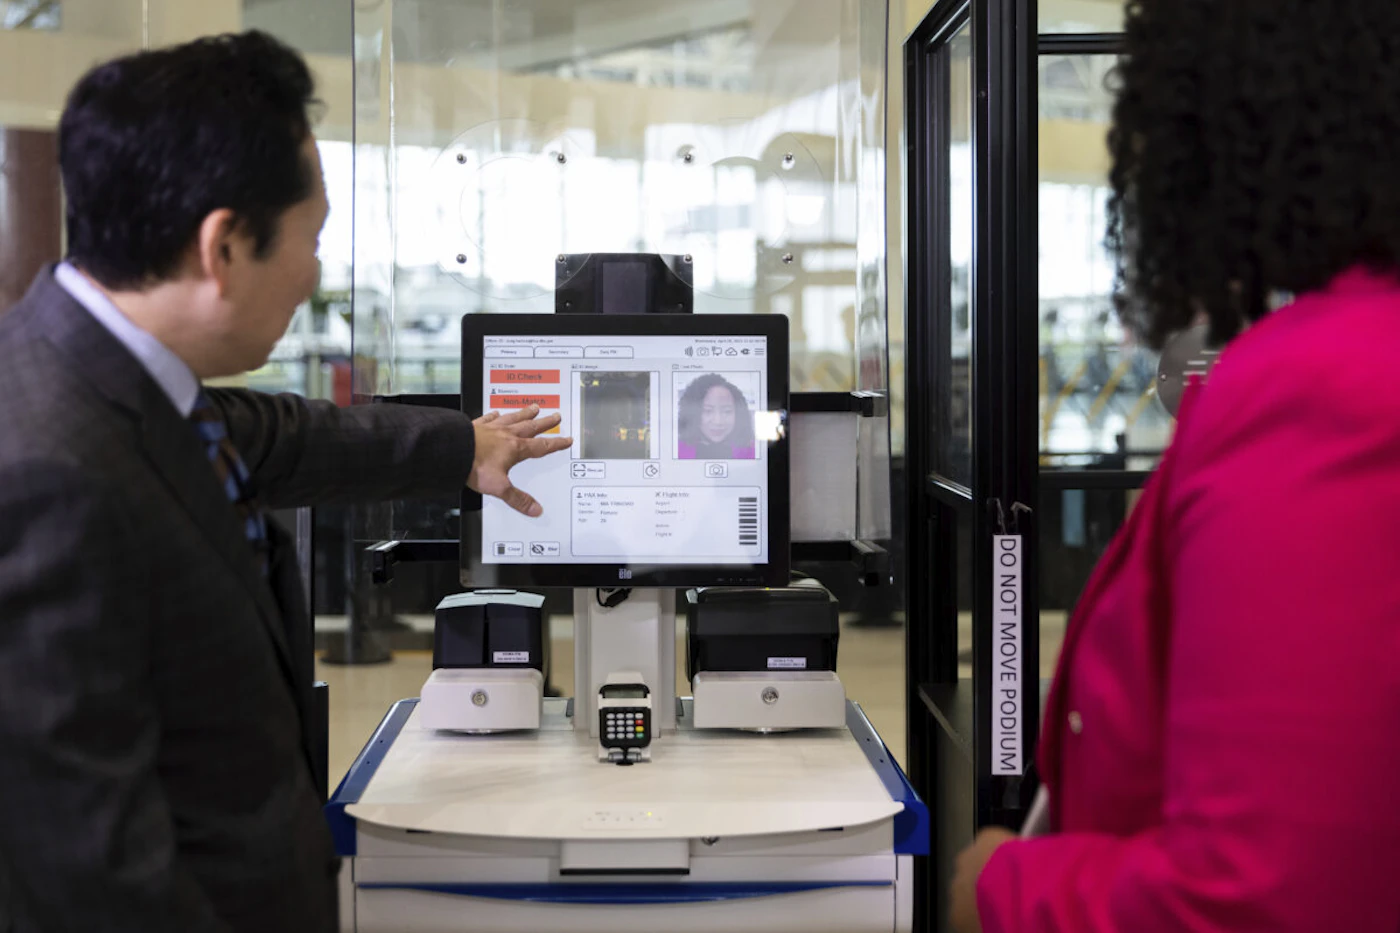 Transportation Security Administration's Identity Management Capabilities Manager Jason Lim demonstrates new facial recognition technology at a Baltimore-Washington International Thurgood Marshall Airport security checkpoint, Wednesday, April 26, 2023, in Glen Burnie, Md. (AP Photo/Julia Nikhinson)